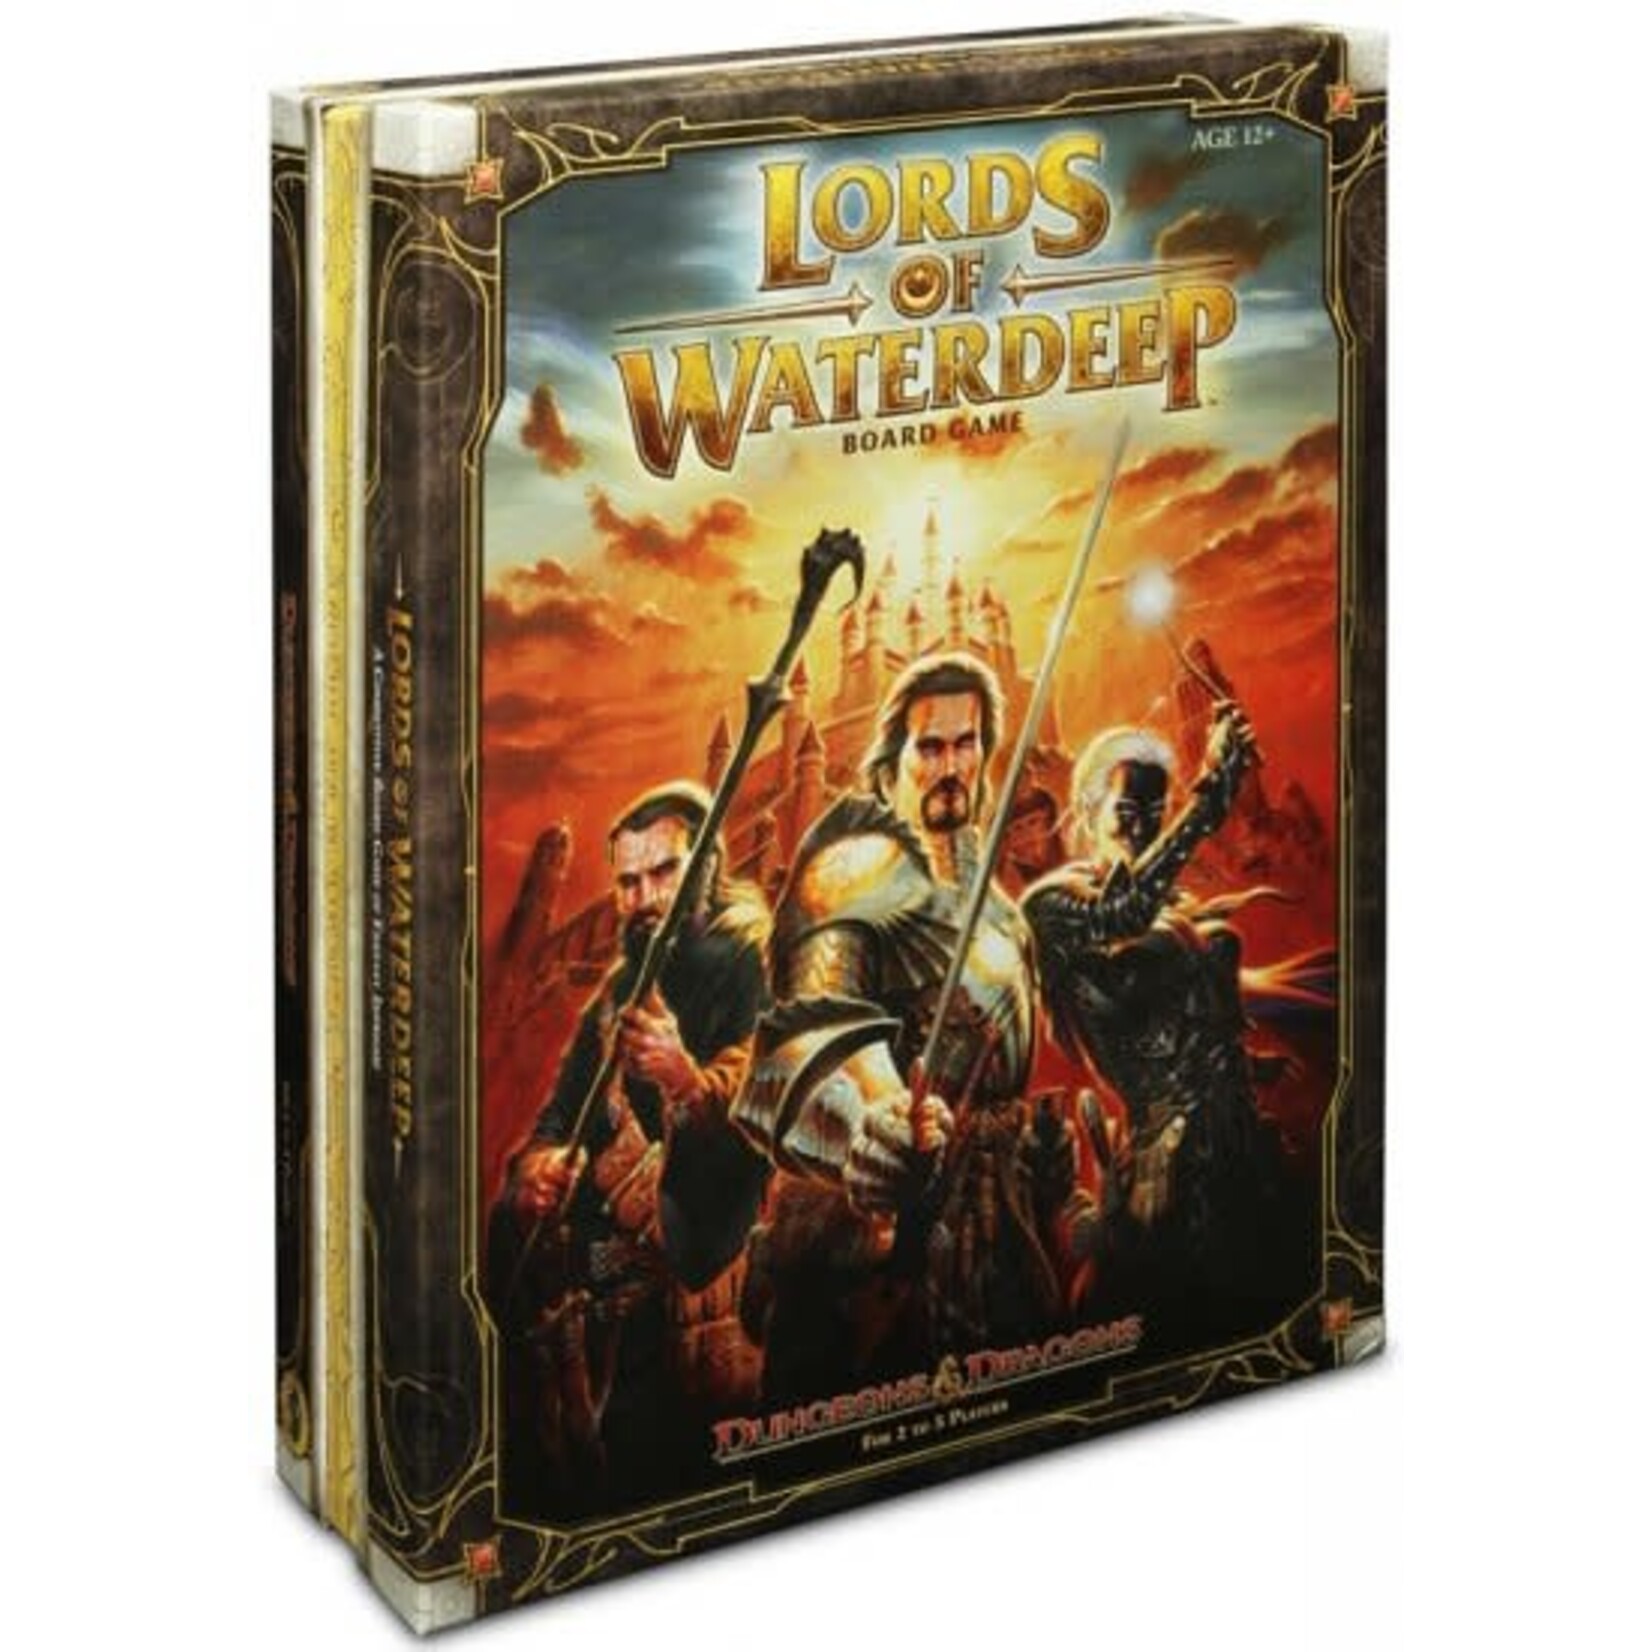 Wizards of the Coast Dungeons & Dragons: Lords of Waterdeep Board Game